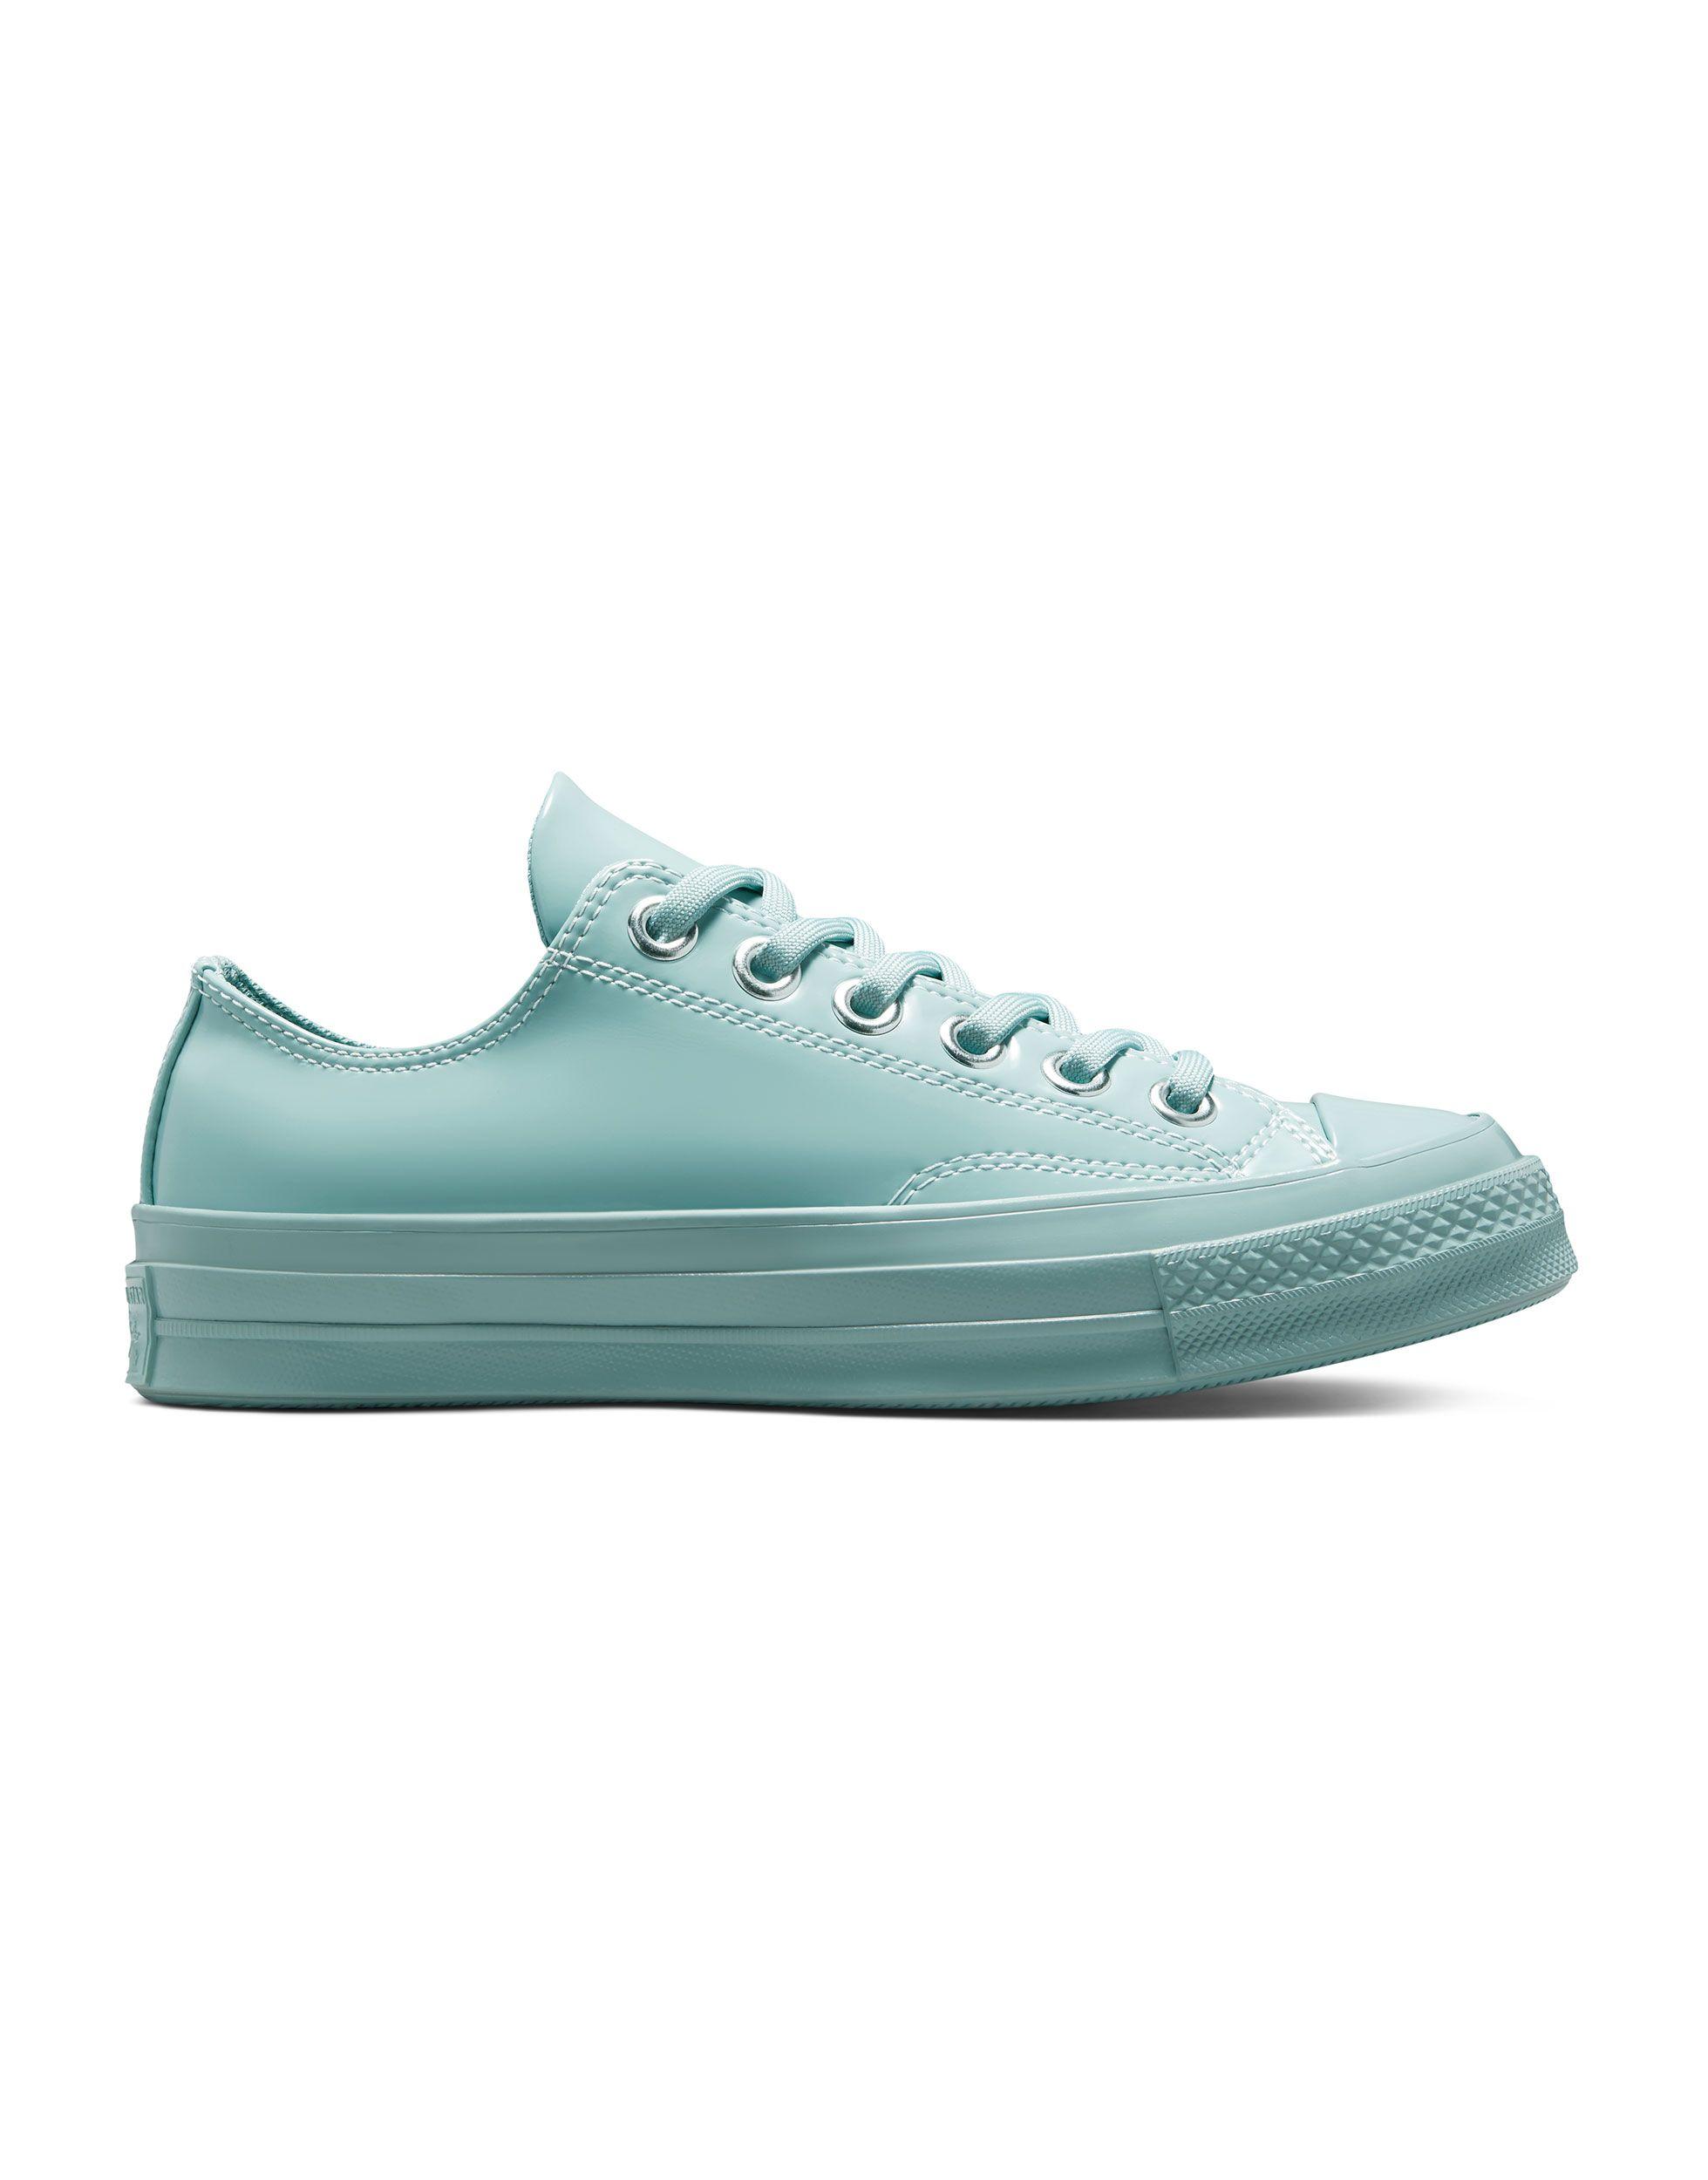 Converse Chuck 70 Ox Hybrid Shine Patent Faux-leather Sneakers in Blue |  Lyst